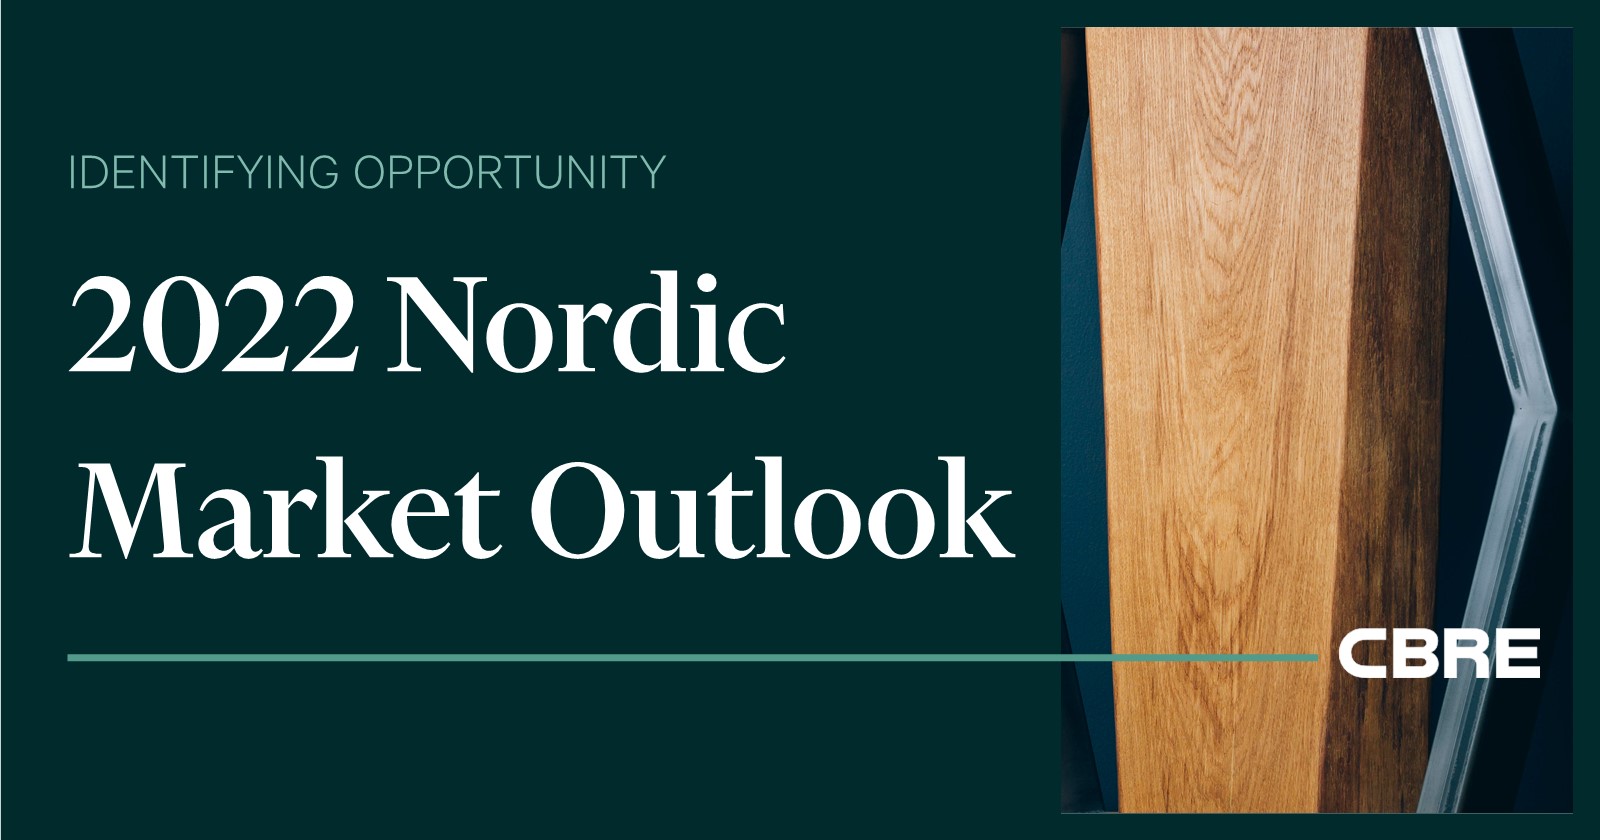 Outlook Nordics banner and SoMe_1